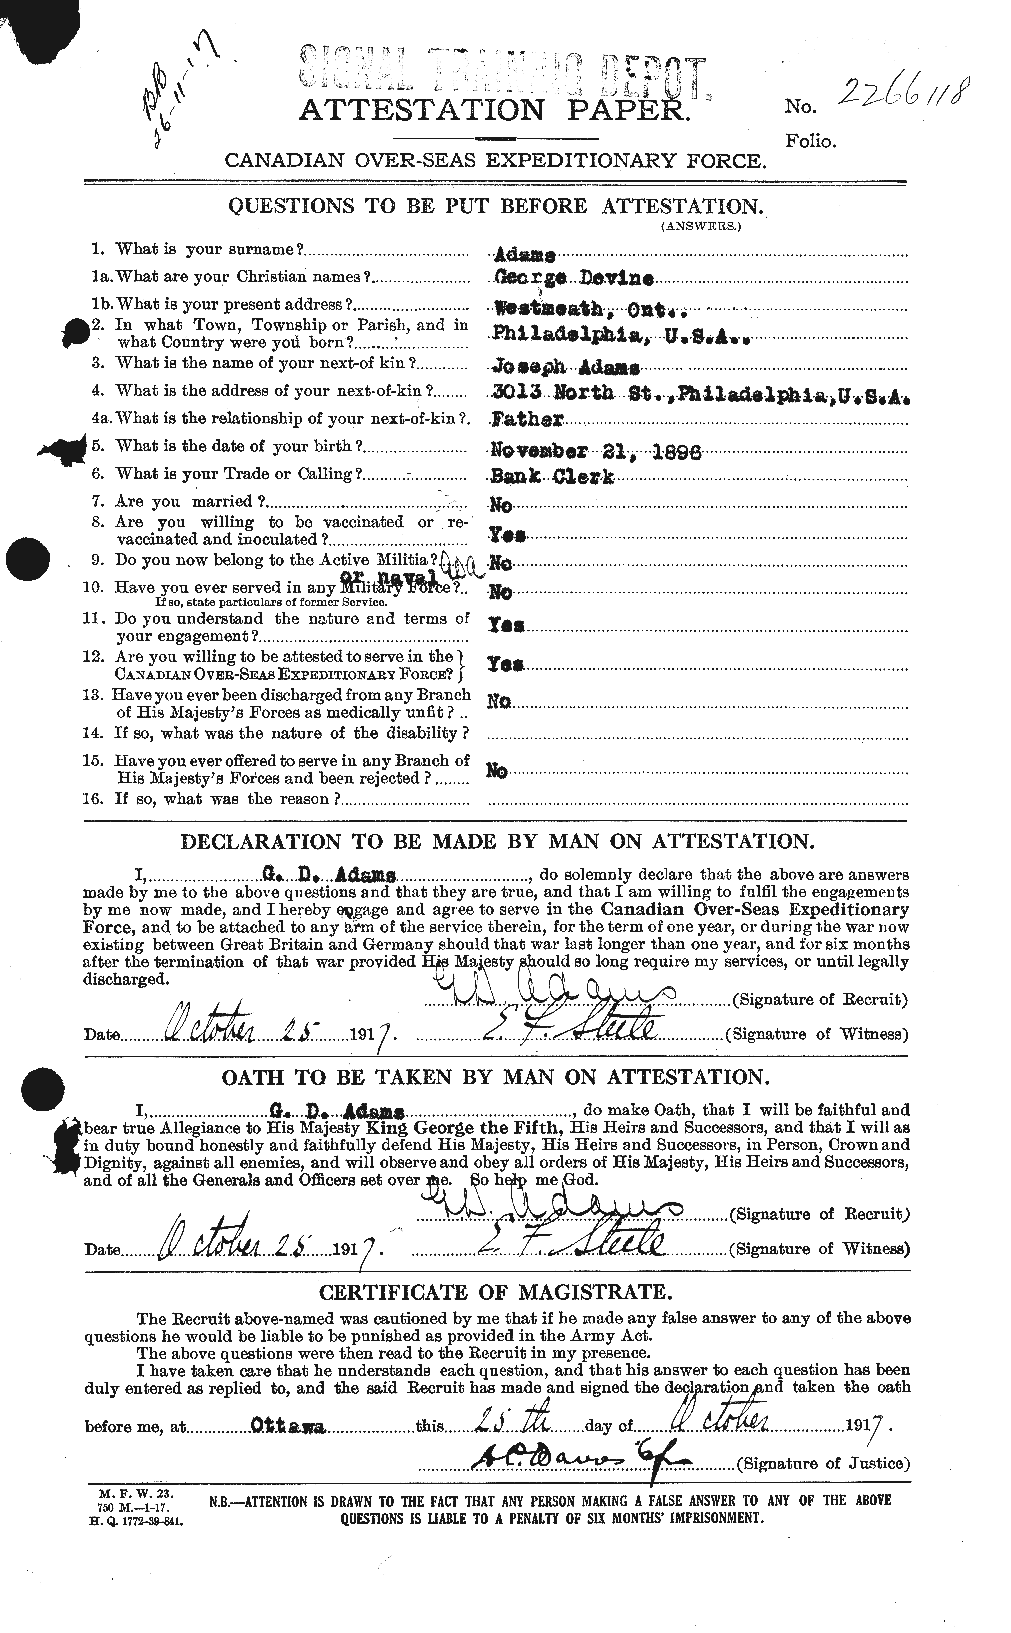 Personnel Records of the First World War - CEF 202554a